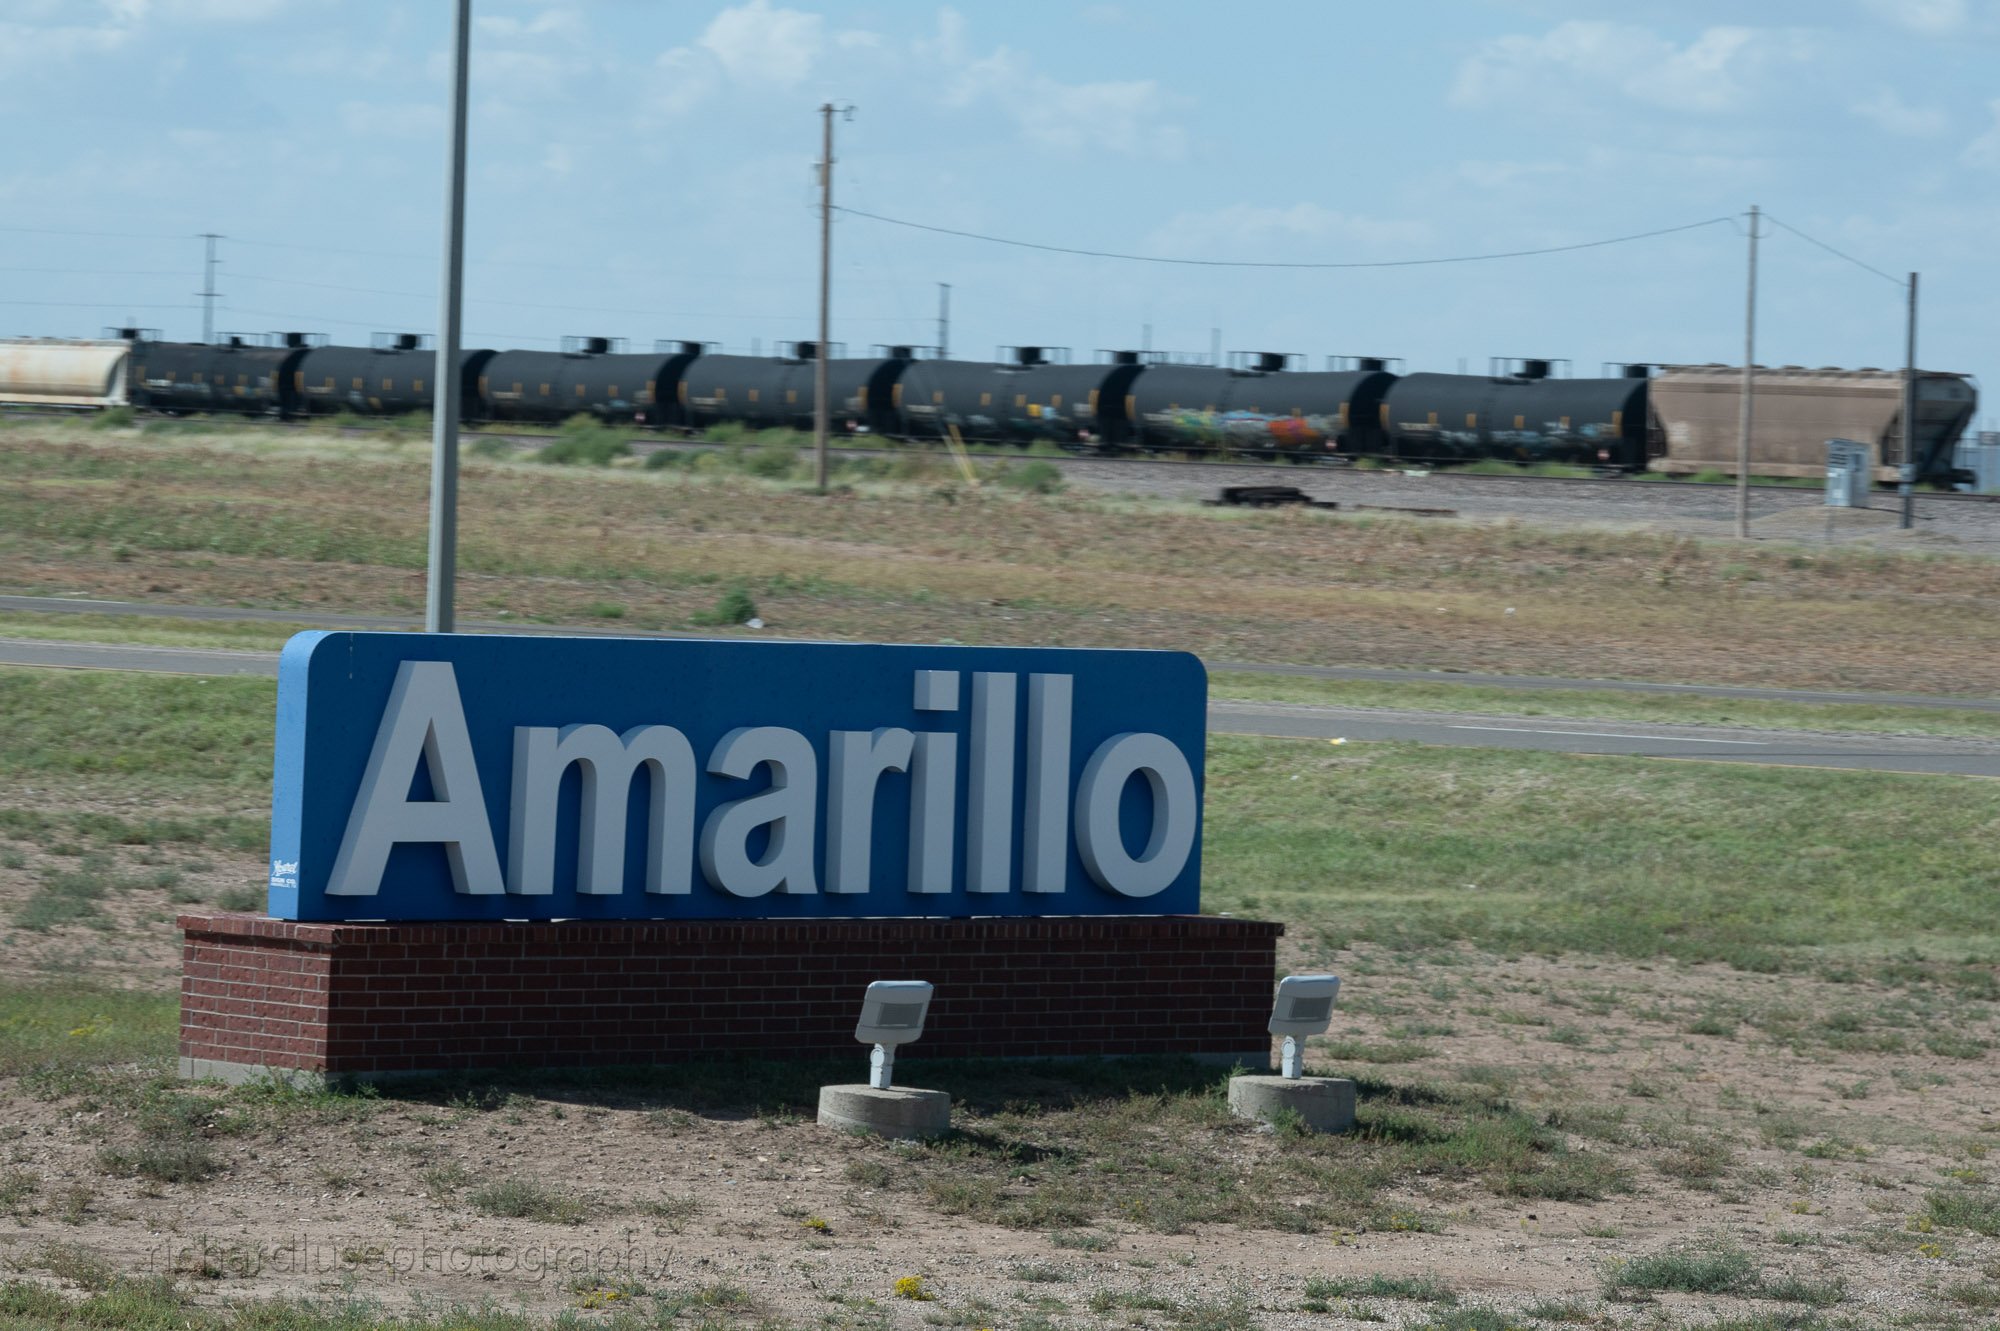 Finally made it Amarillo, on day three, our first photo stop